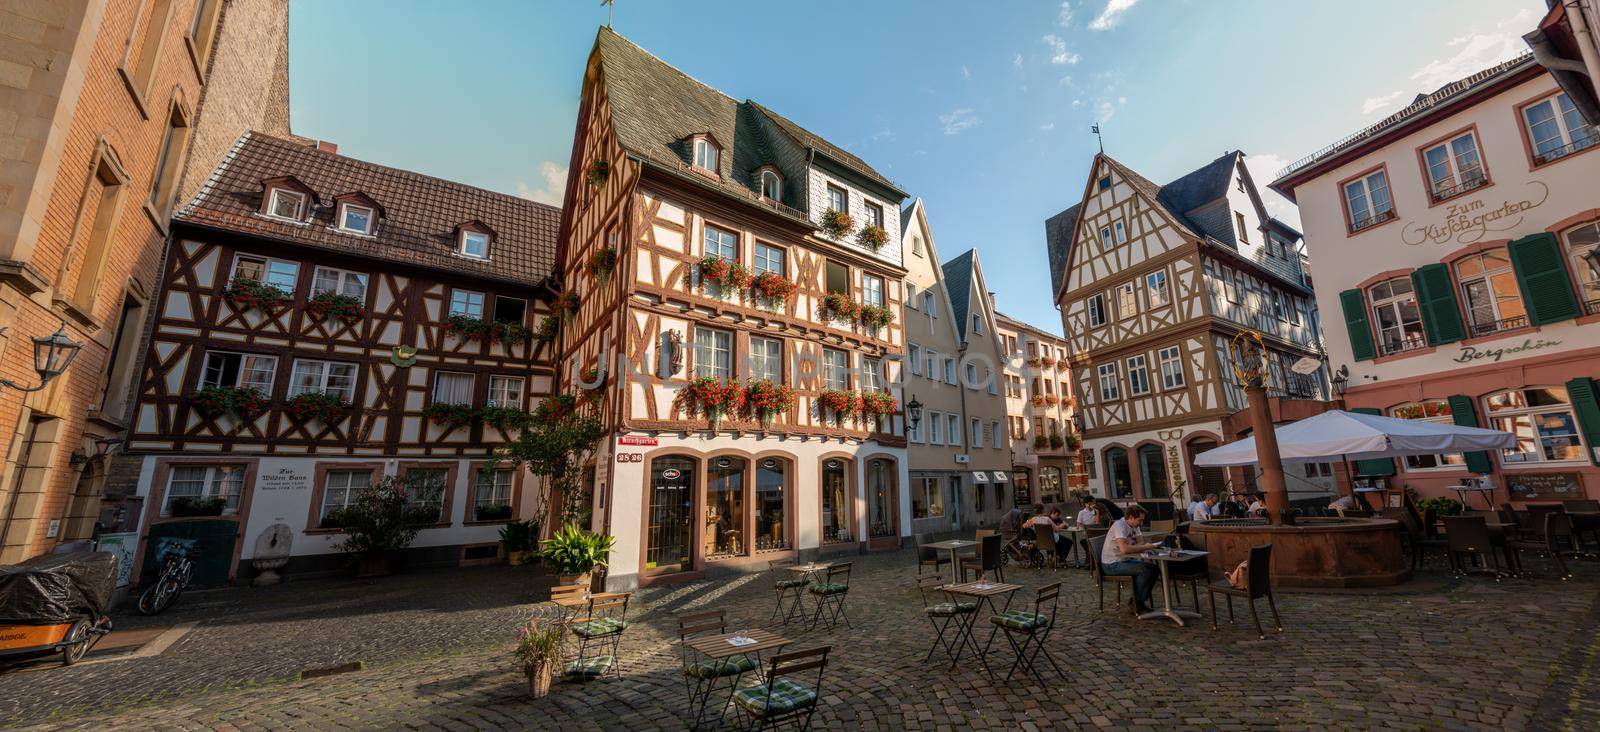 Mainz Germany August 2020, Classical timber houses in the center of Mainz, Germany by fokkebok